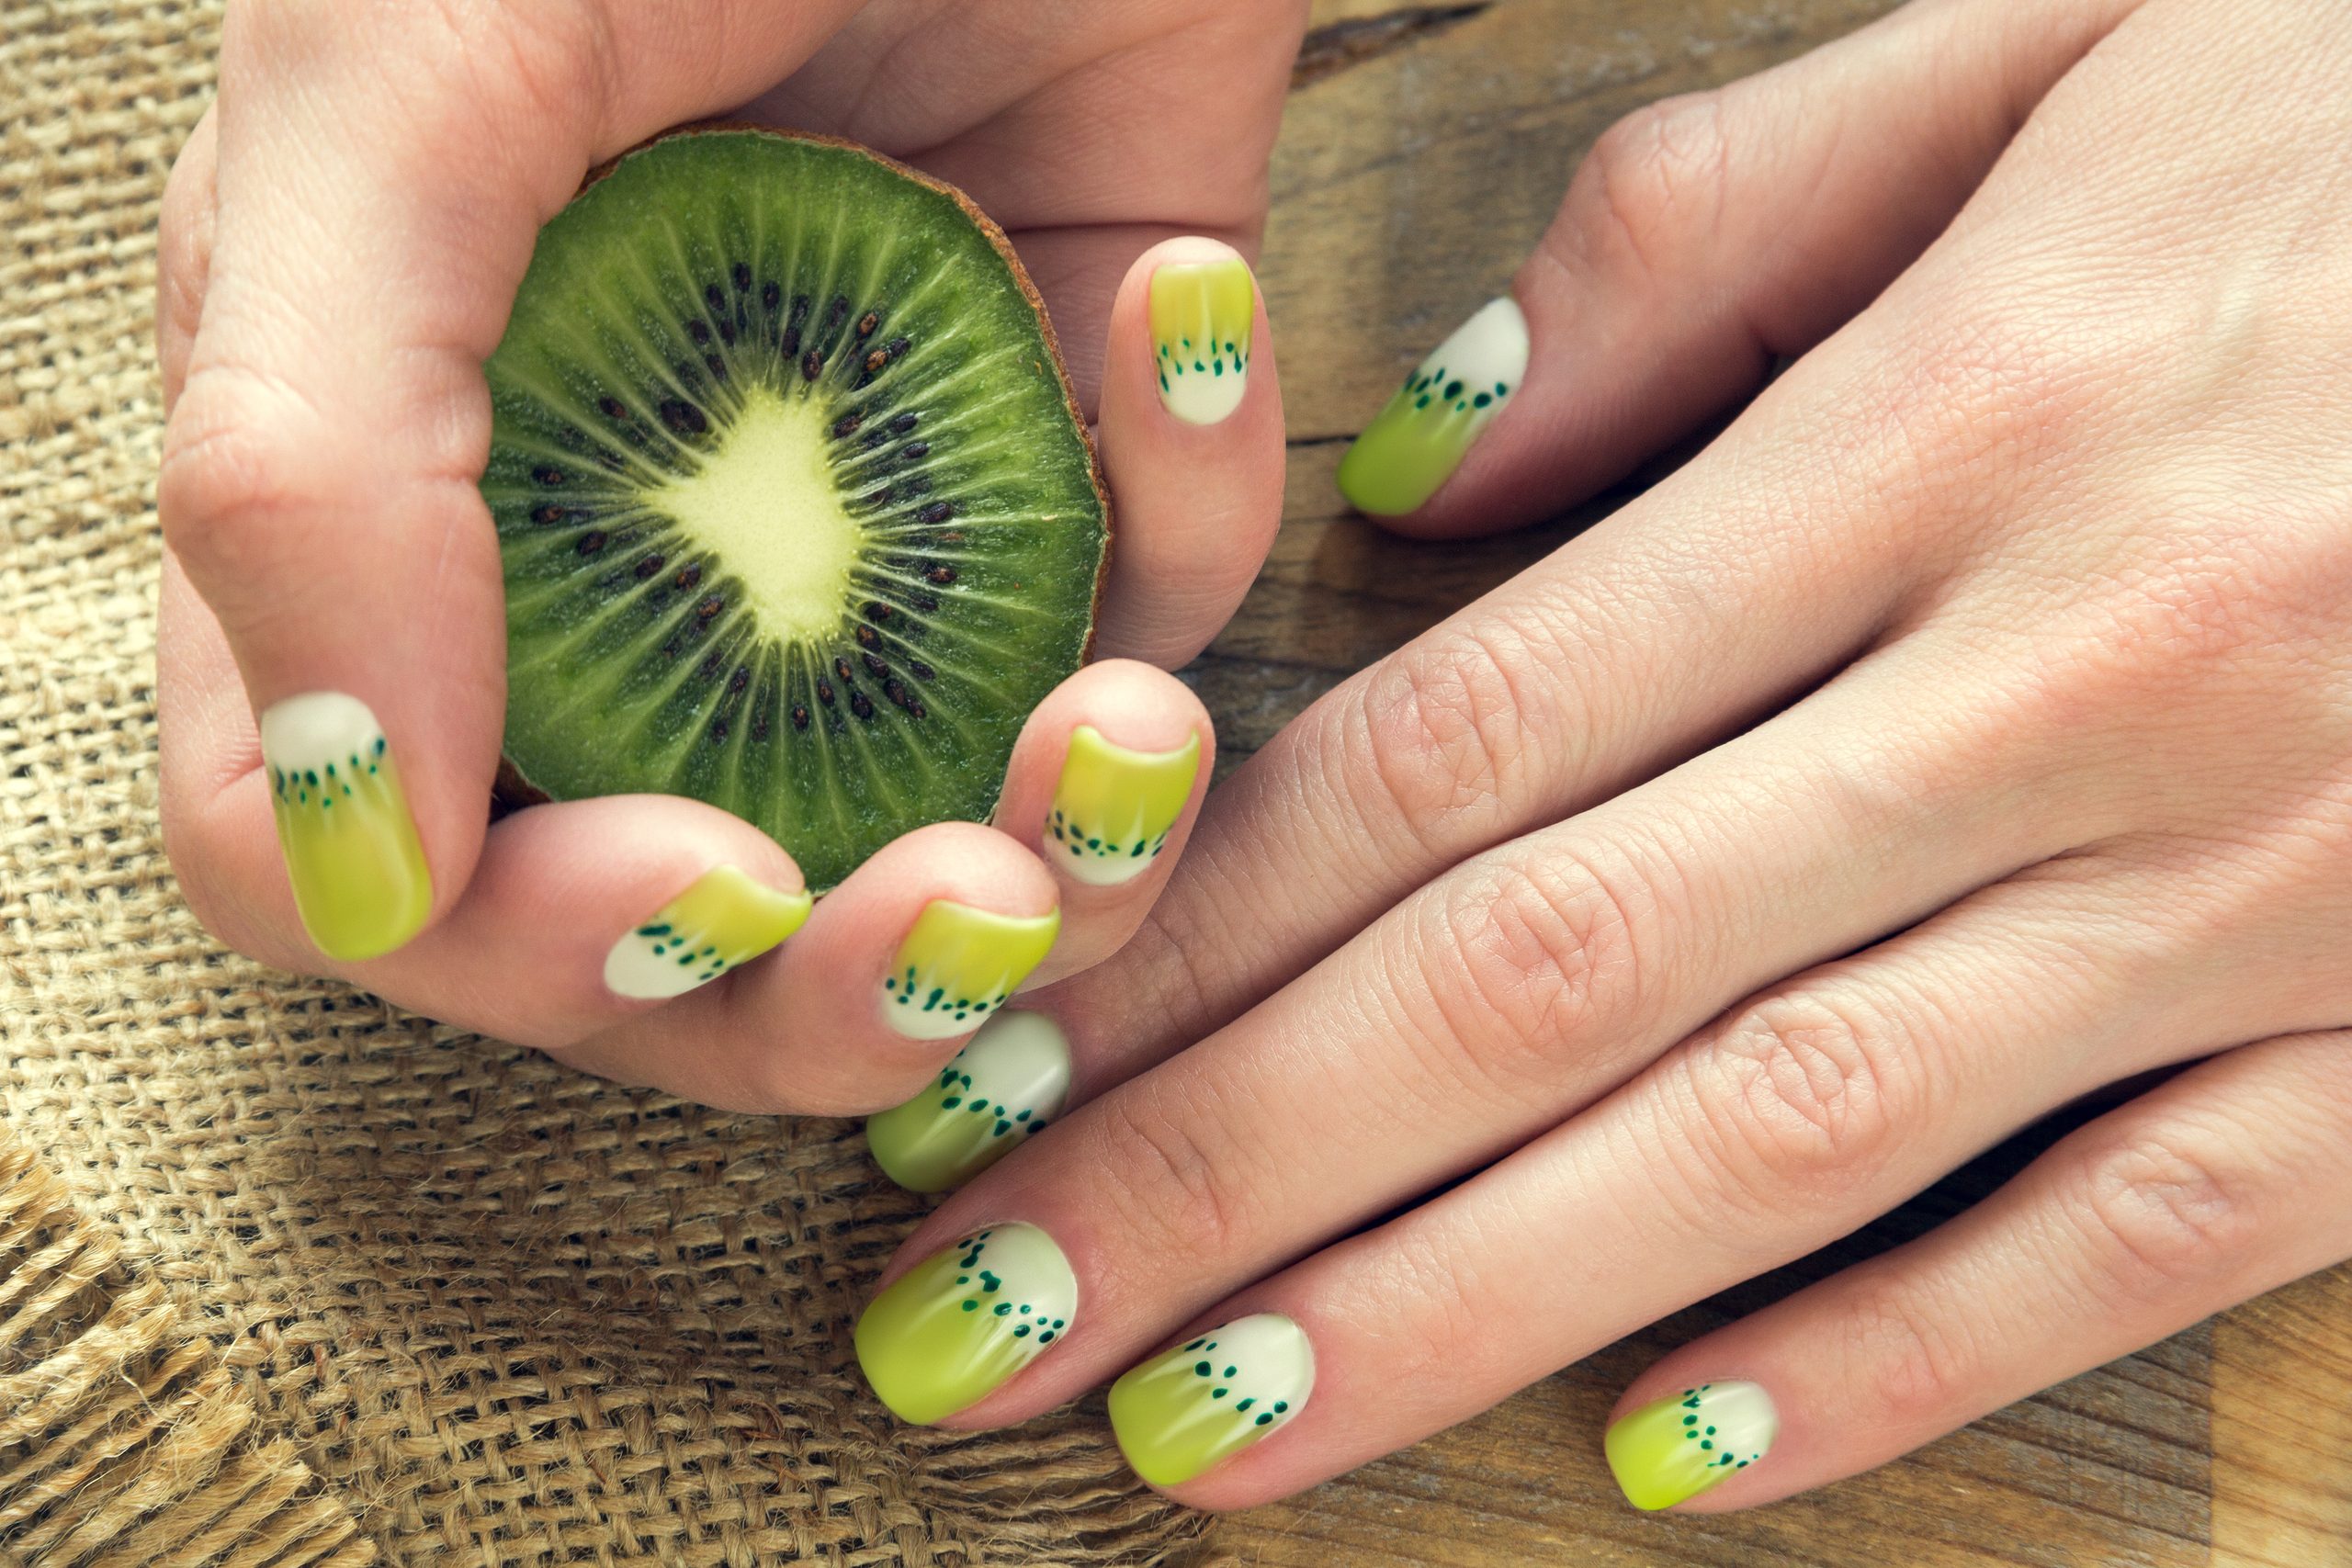 Kiwi and skin care of a beauty female hands with green and white moon nail art manicure on a sackcloth and wooden background